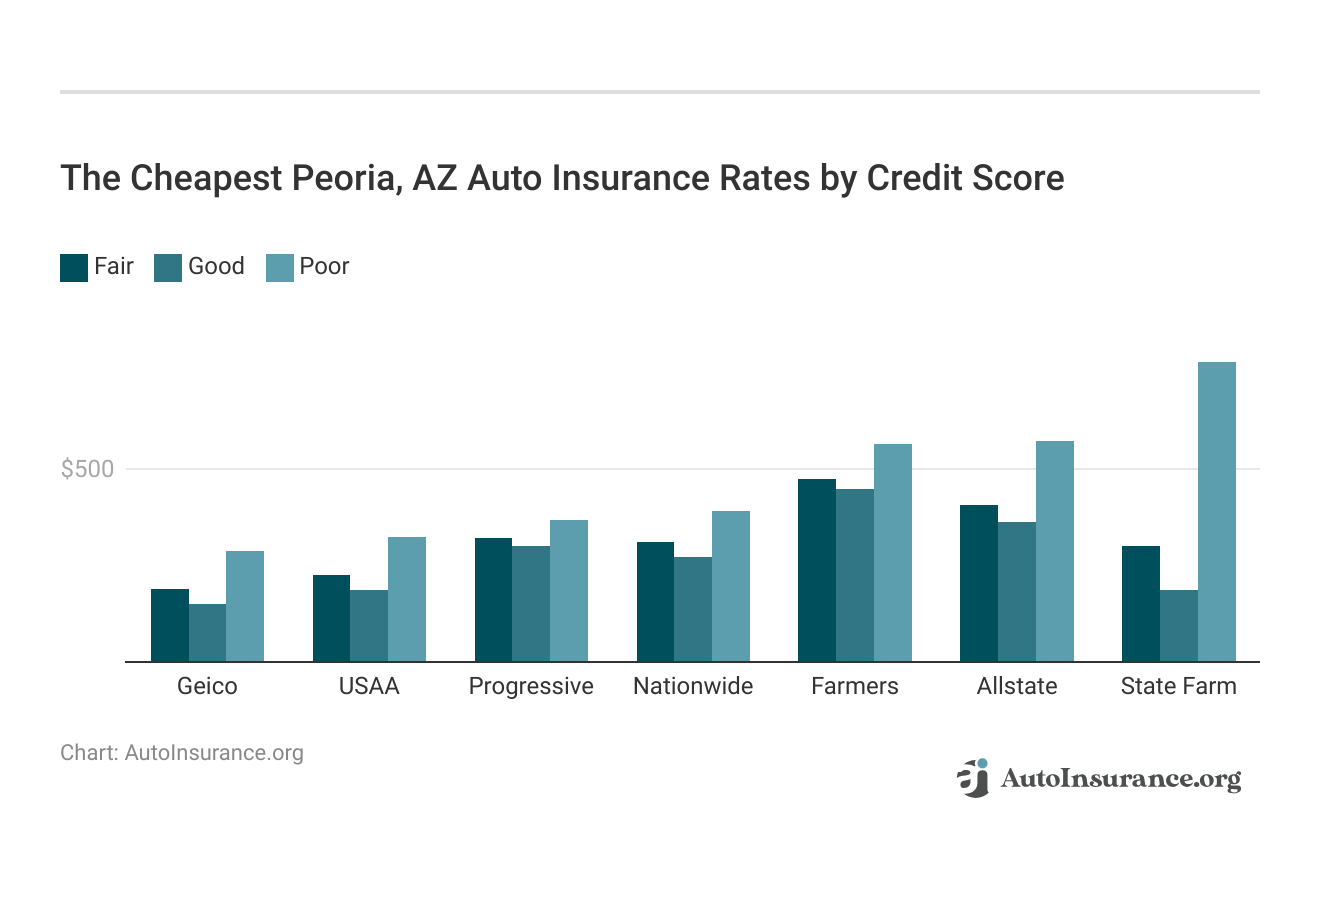 <h3>The Cheapest Peoria, AZ Auto Insurance Rates by Credit Score</h3>